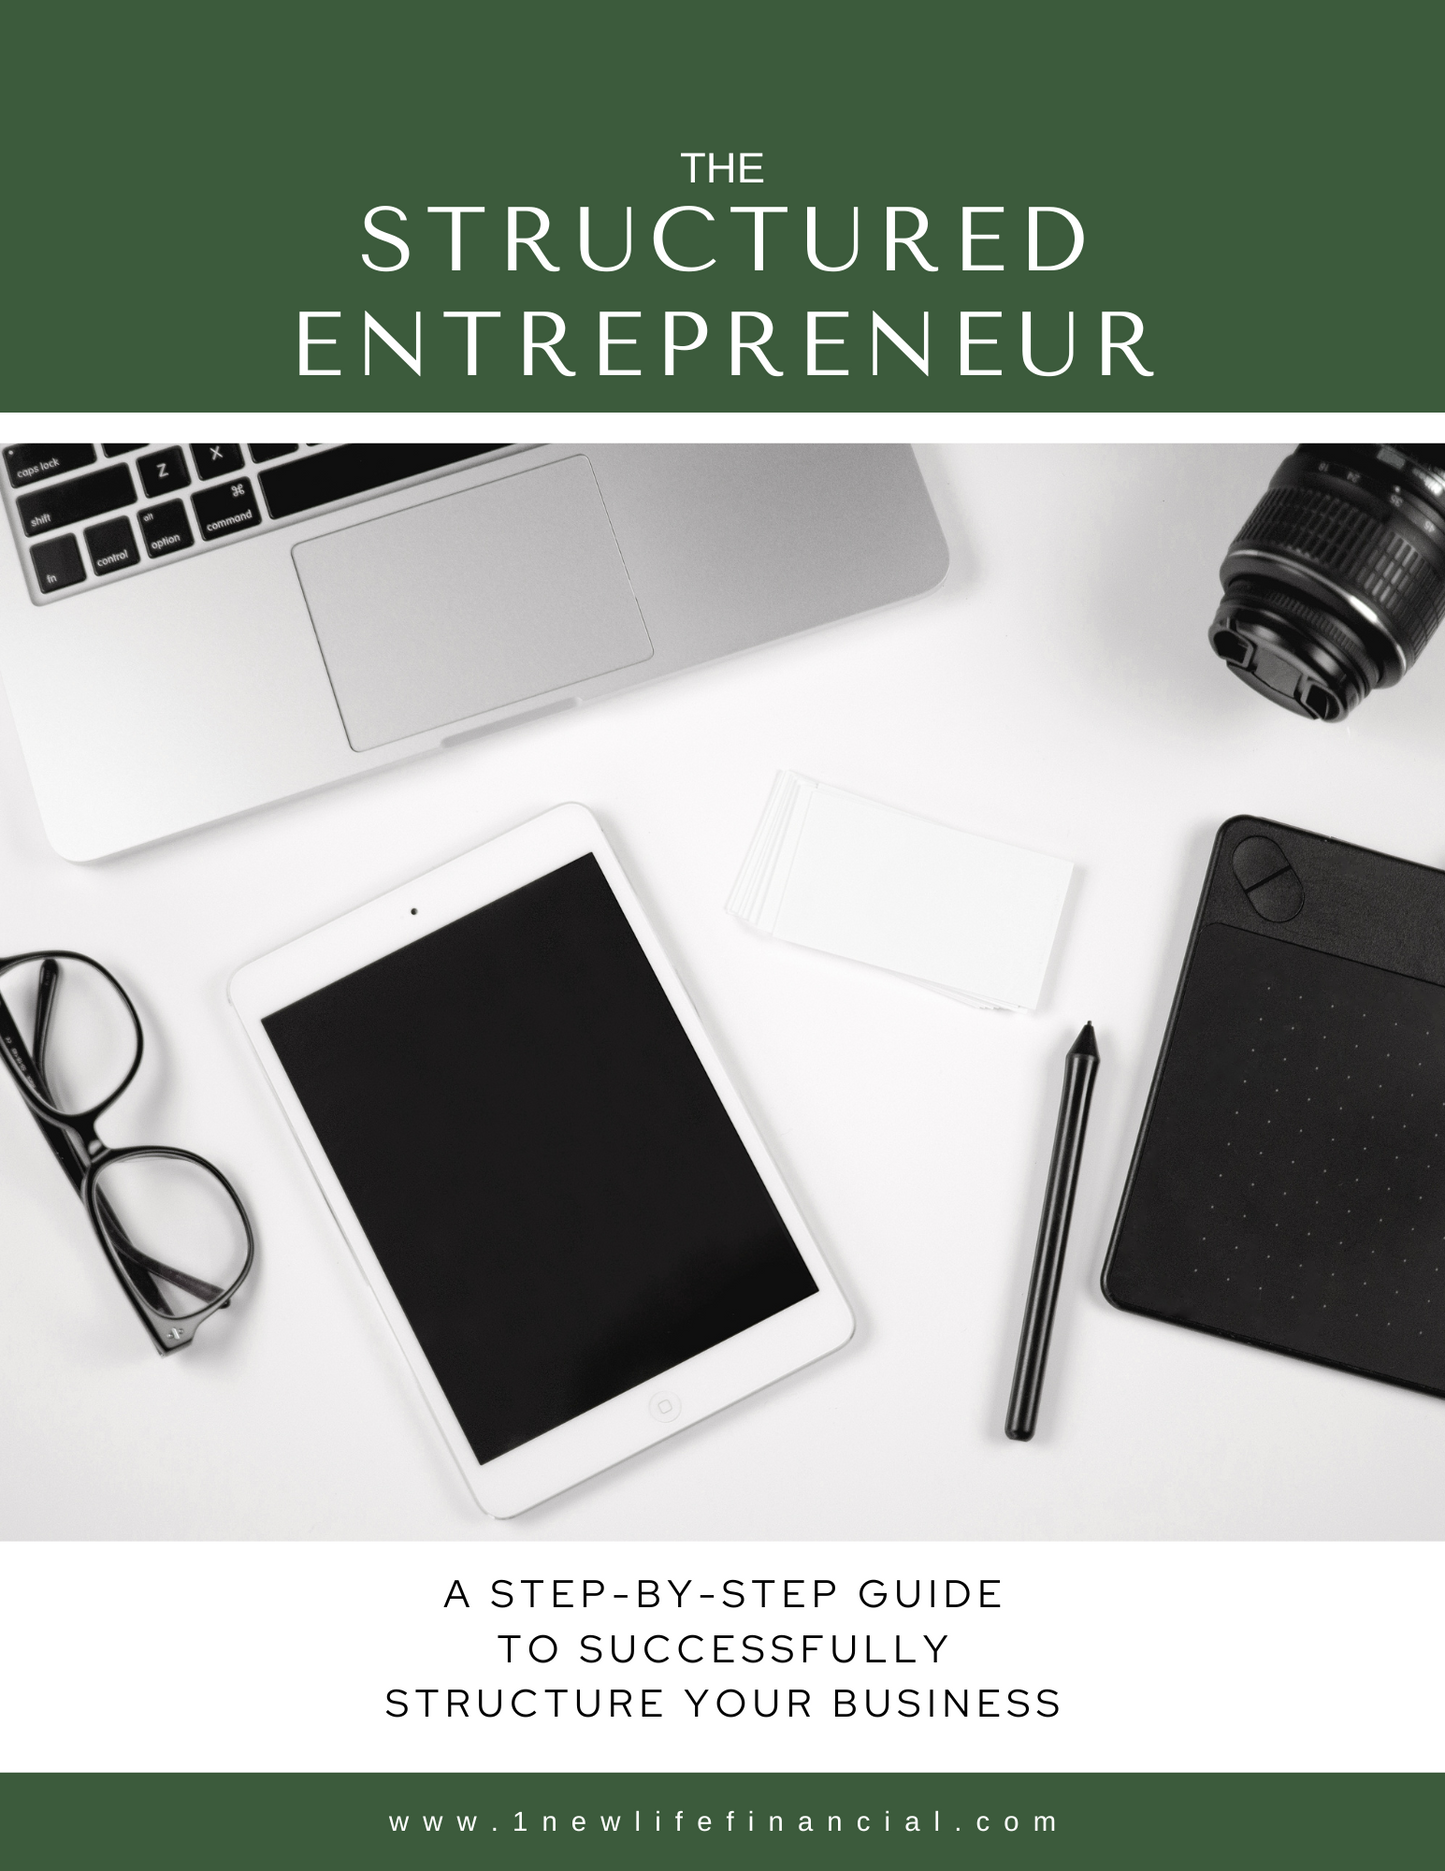 "The Structured Entrepreneur" DIY Business structuring guide